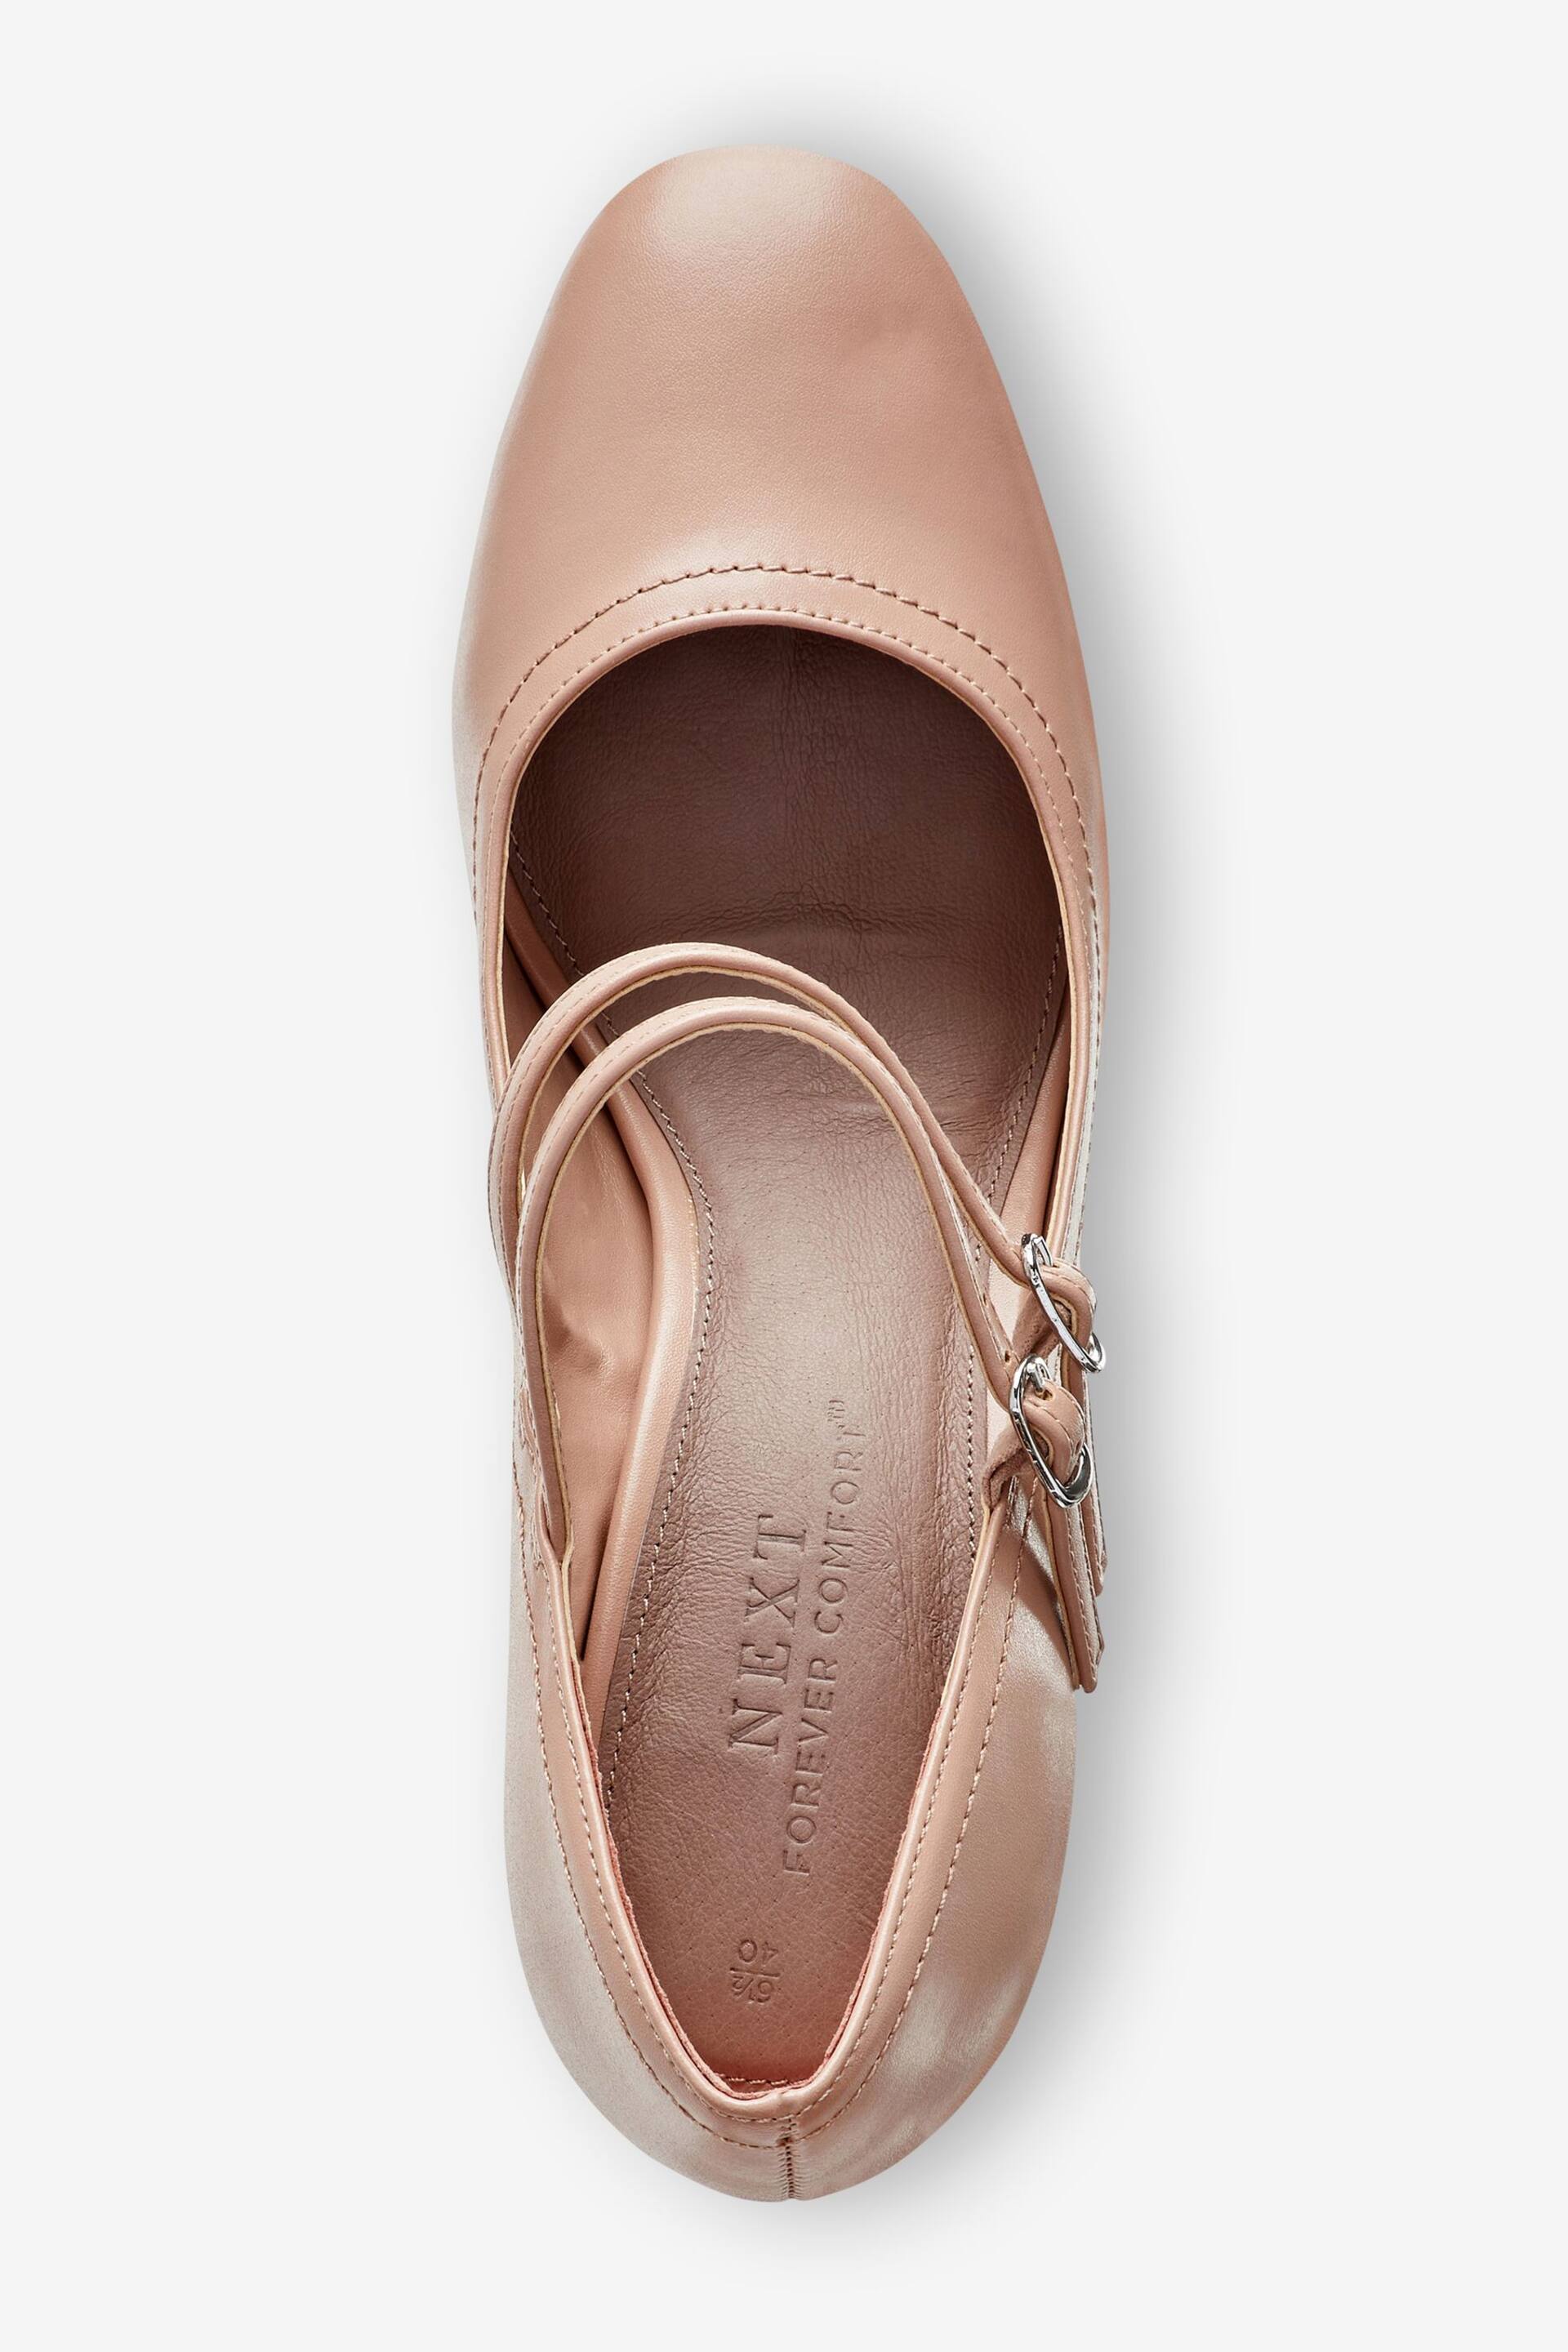 Nude Pink Regular/Wide Fit Forever Comfort® Mary Jane Shoes - Image 5 of 6